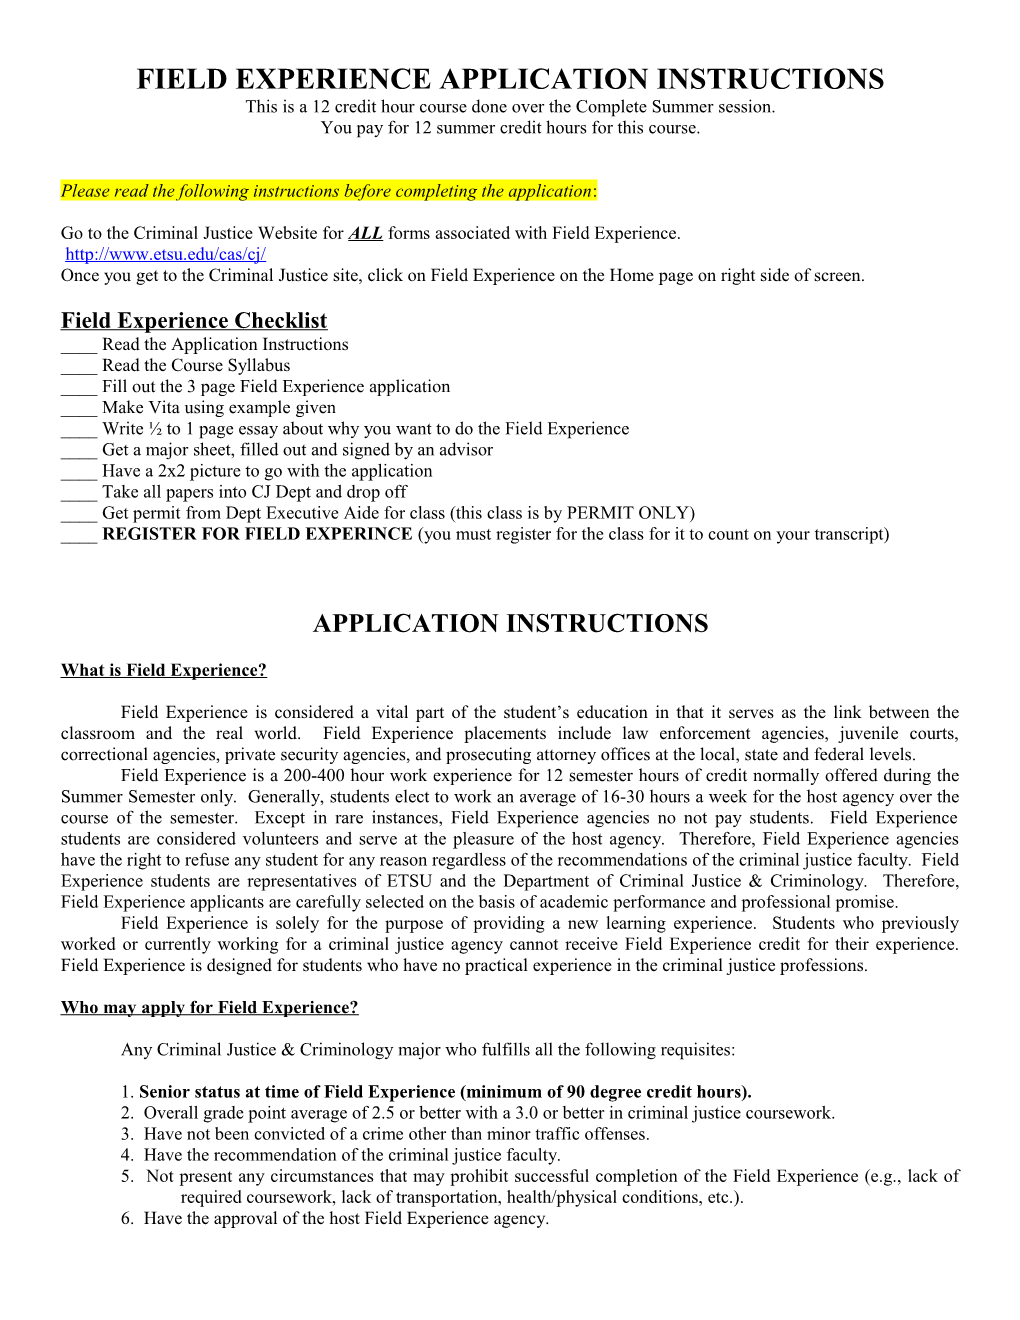 Field Experience Application Instructions